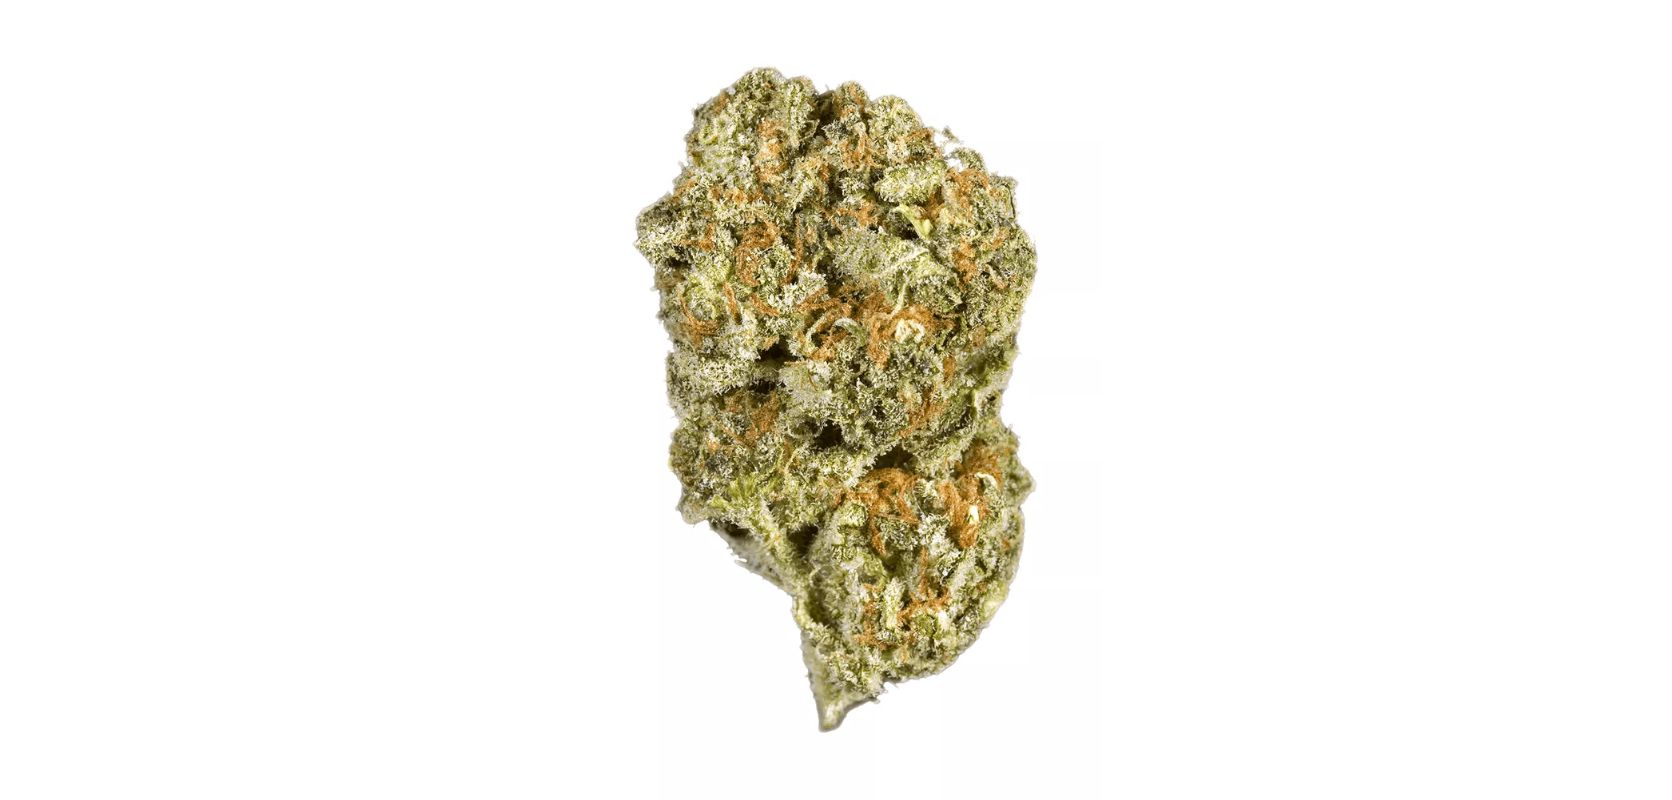 The Trainwreck strain is like a fun train trip for your senses, giving you a great mix of tastes and smells. 